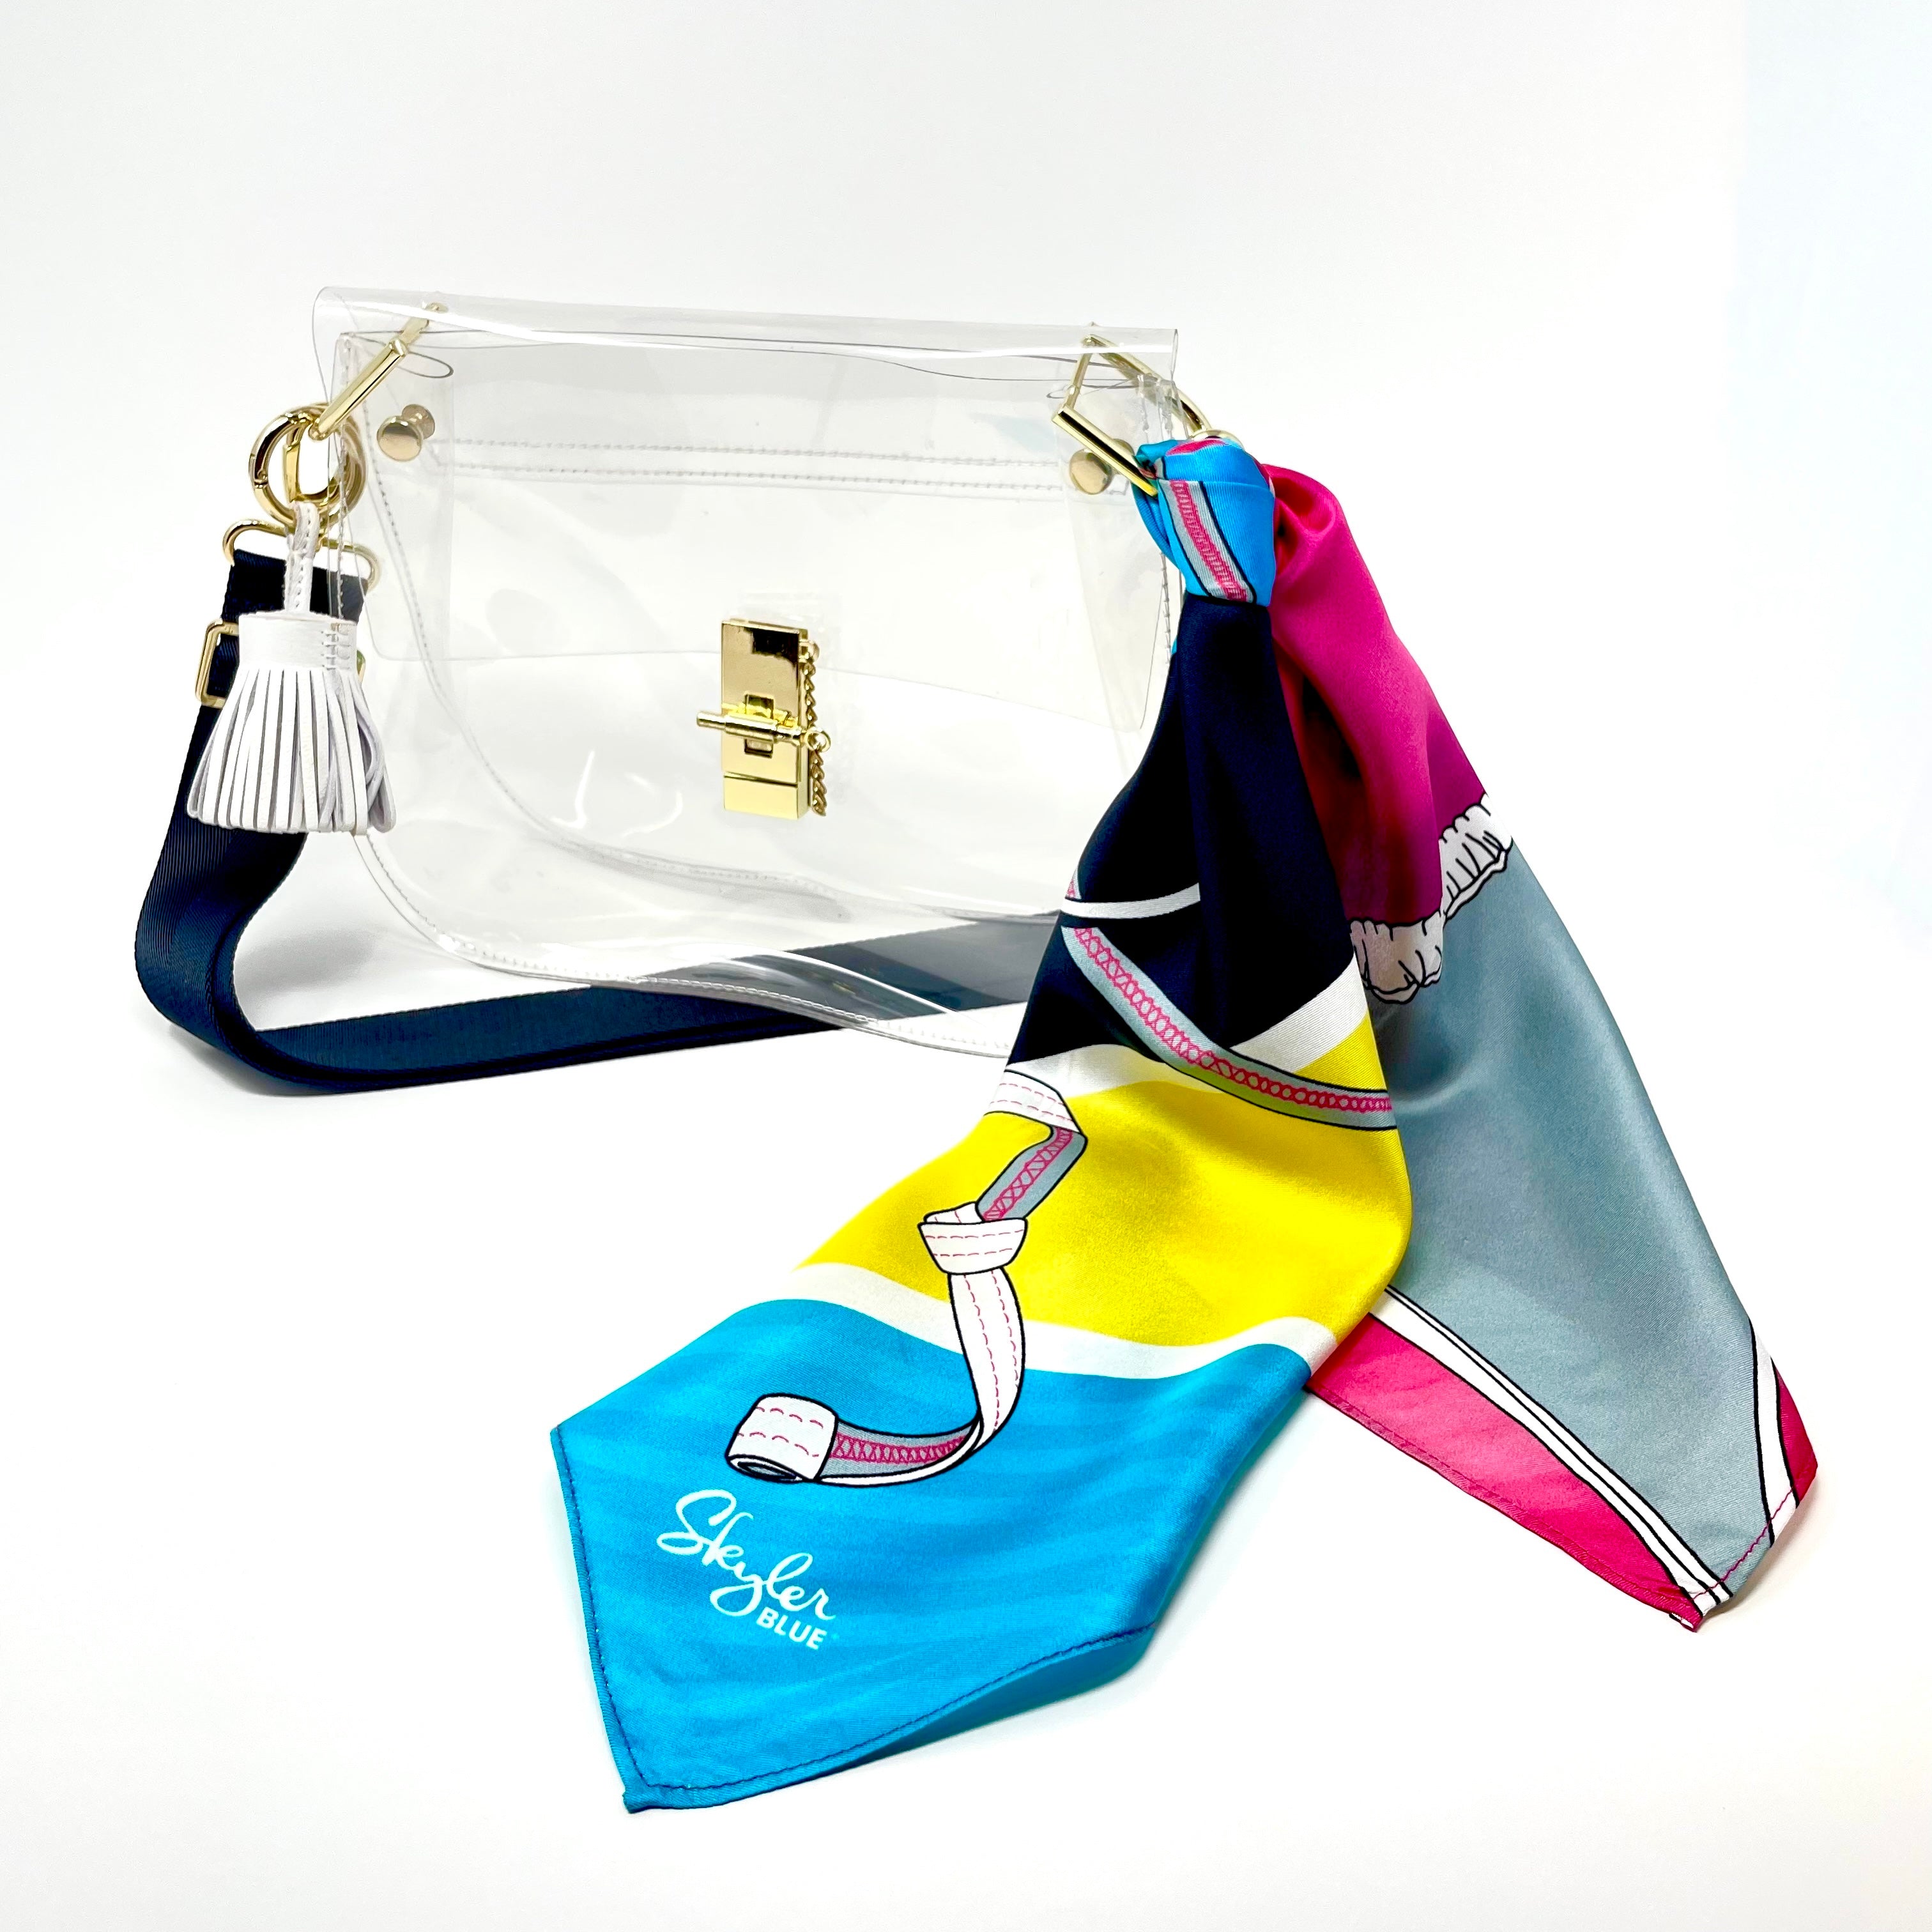 Skyler Blue’s The Bikini Medium Saddle Clear Bag stadium approved clear bag / clear purse including adjustable, nylon webbing shoulder or crossbody strap with herringbone weave and gold hardware, 60-centimeter 100% silk twill scarf, and 100% genuine leather tassel. 